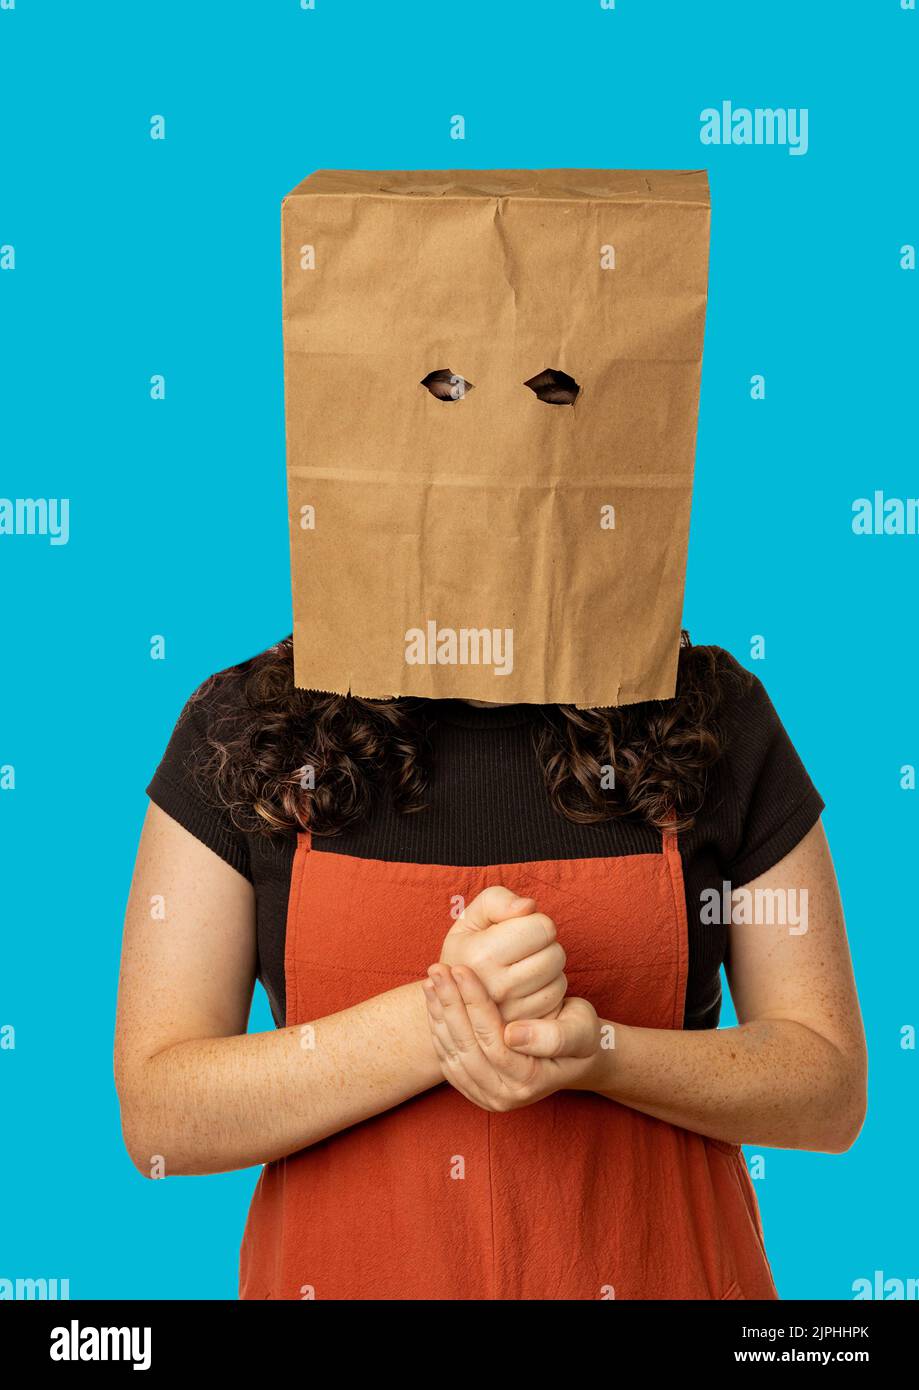 Woman wearing paper bag over her head holding her fist Stock Photo